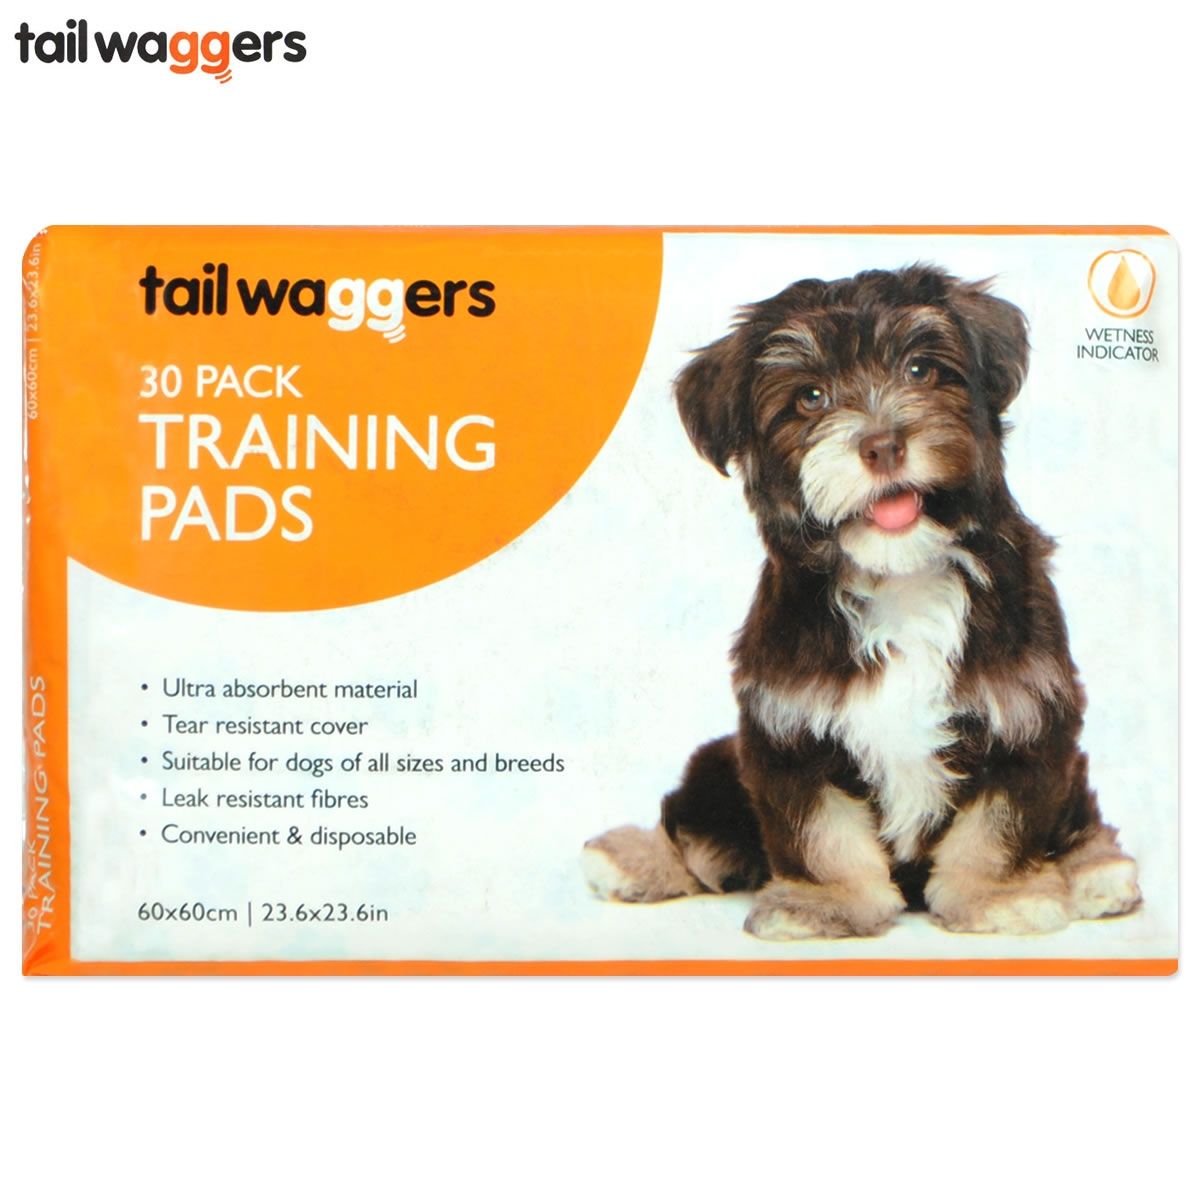 Tail Waggers Training Pads-30 Pack - 60cm x 60cm